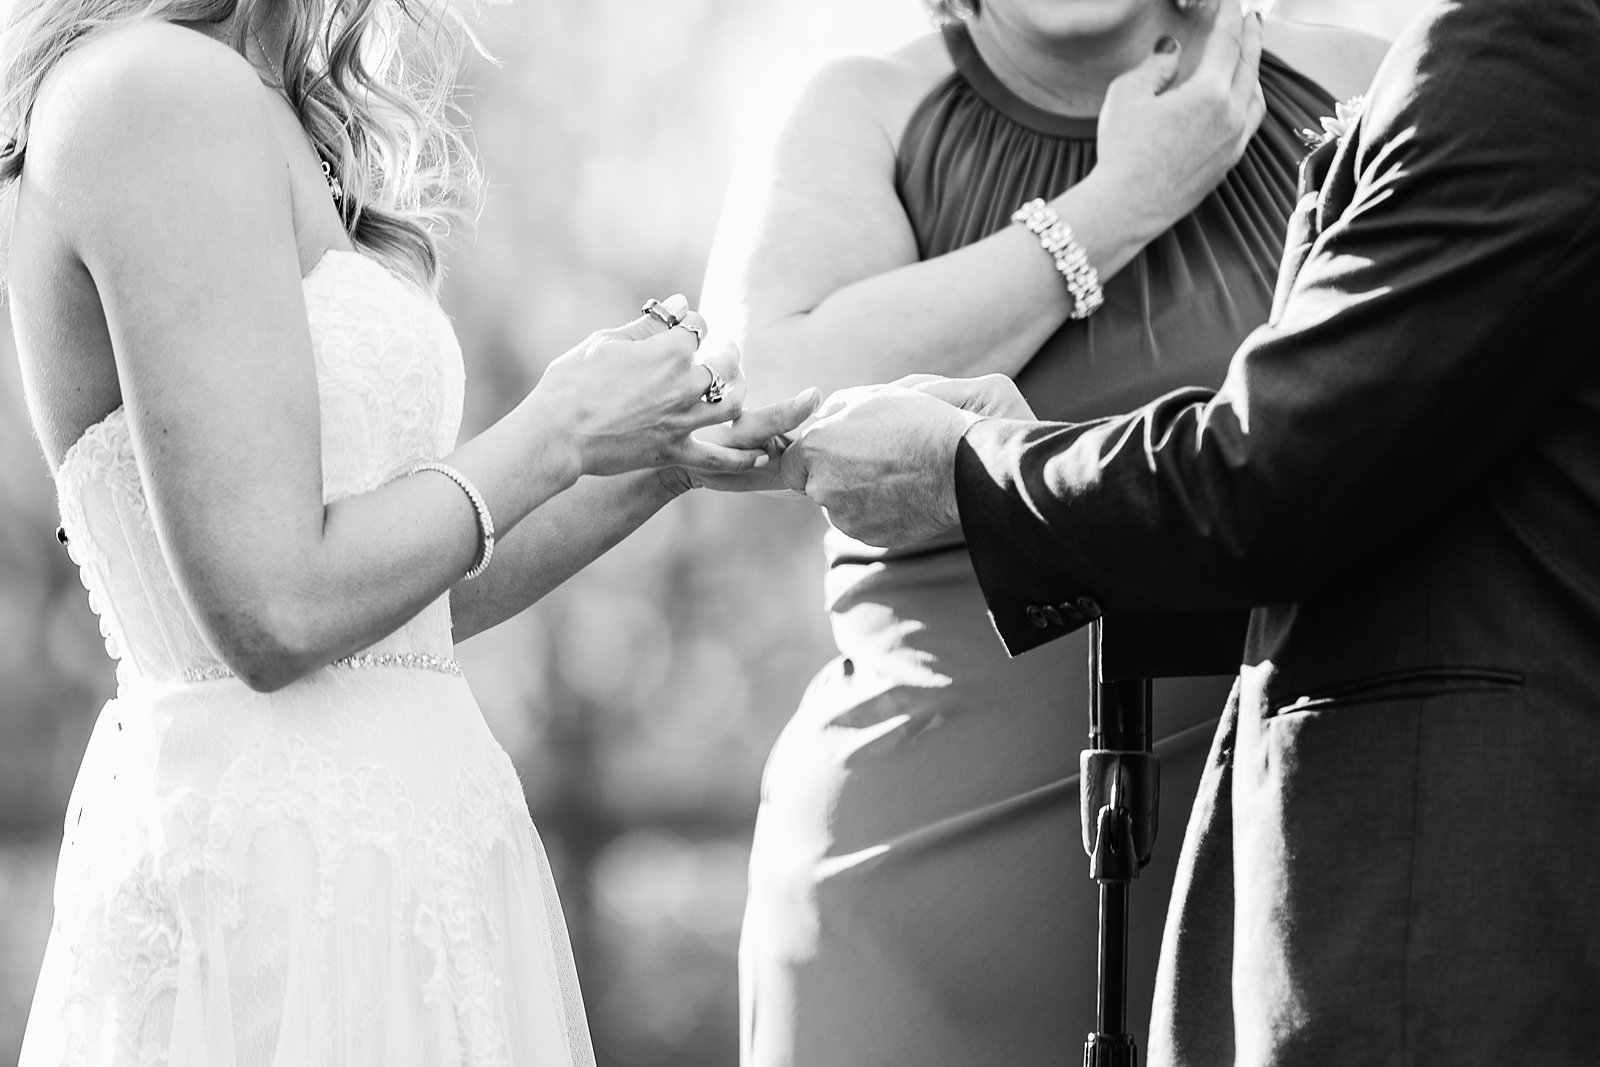 Bride and Groom exchange rings during their wedding ceremony at Venue At The Grove by Arizona wedding photographer PMA Photography.